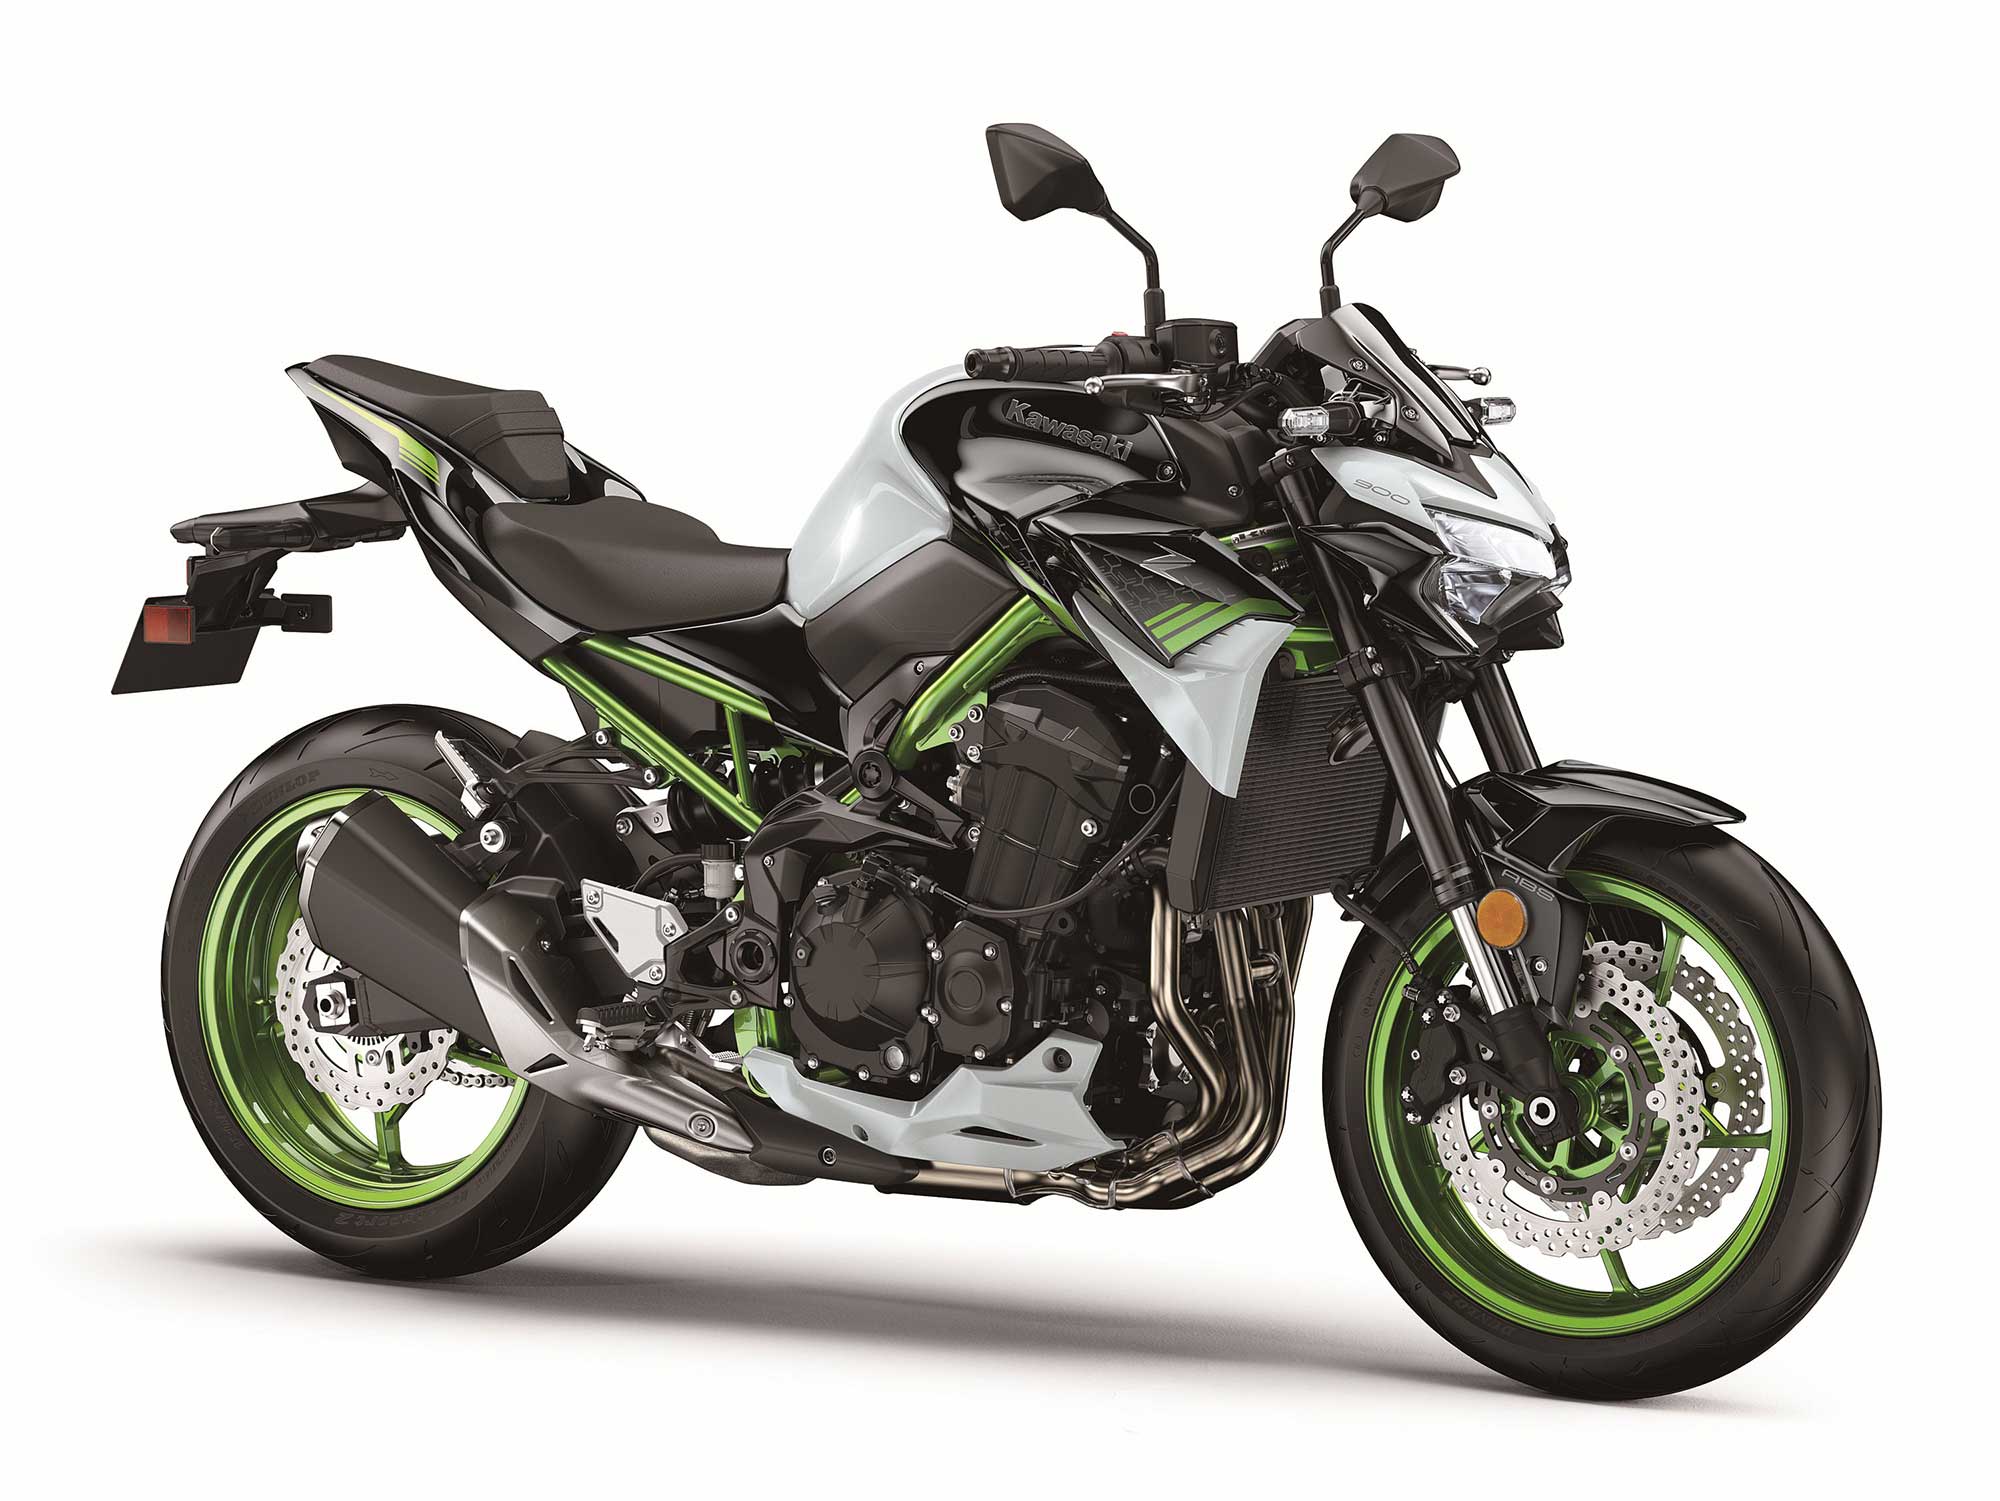 2017 Kawasaki Z900 review, performance, specifications, price